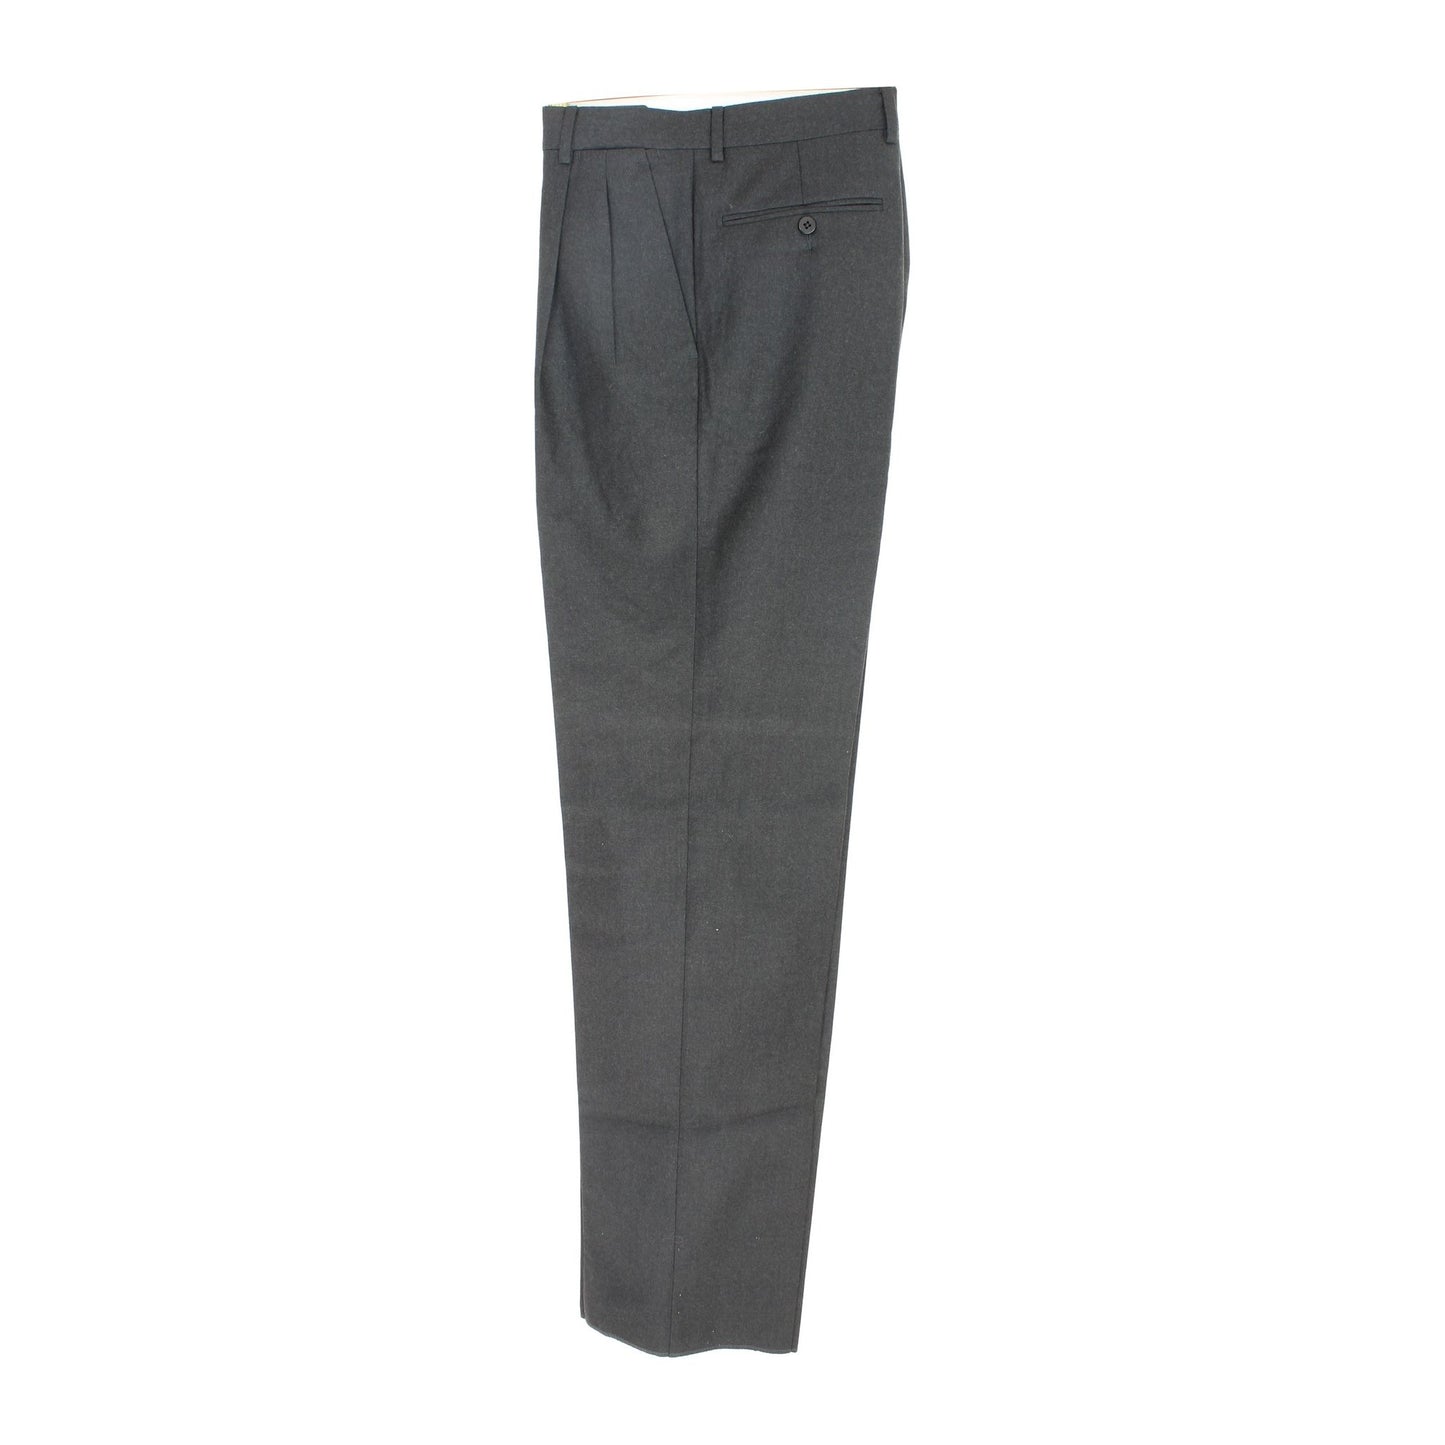 burberry gray trousers